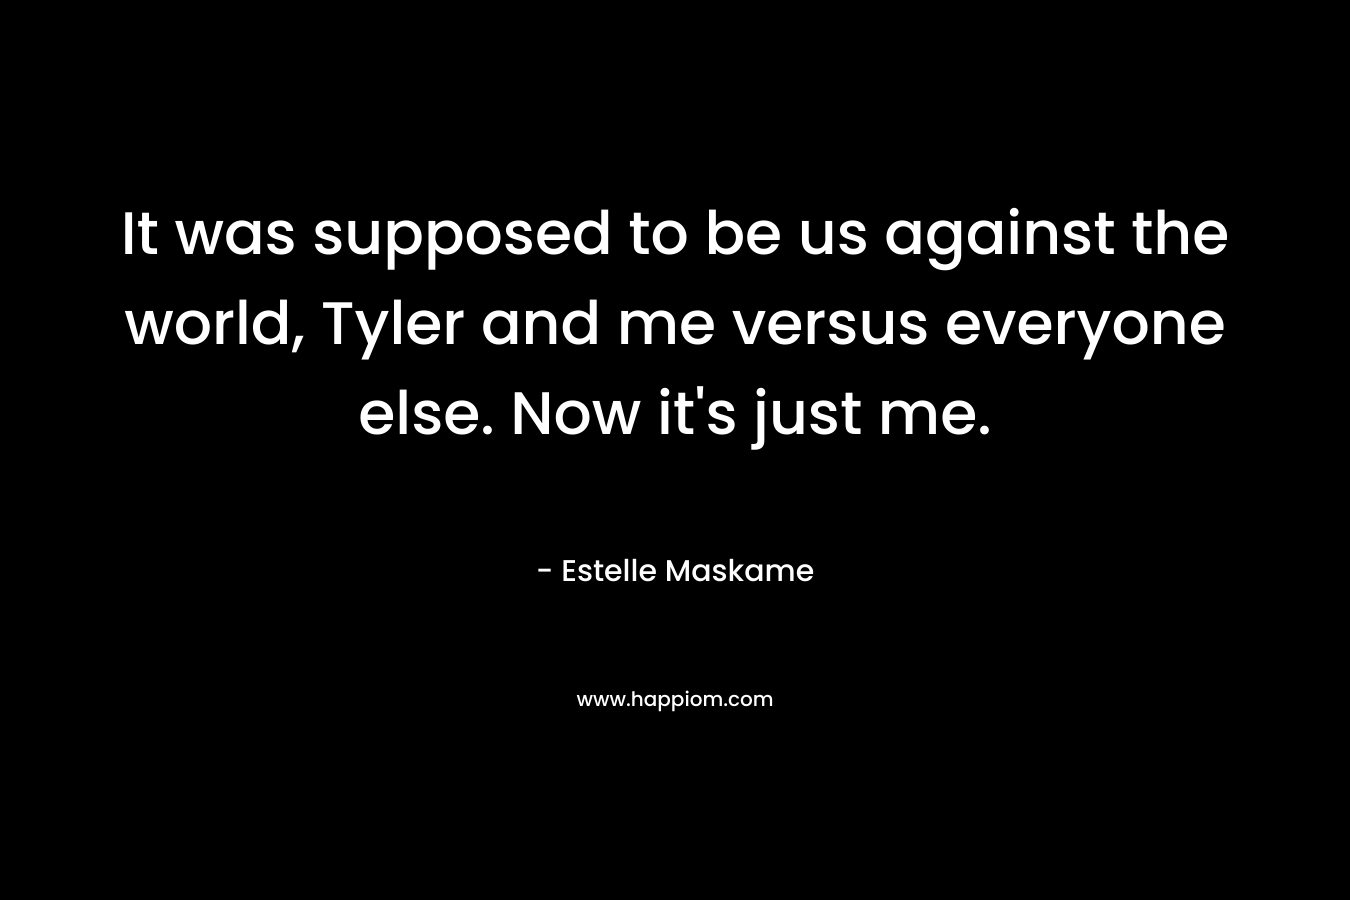 It was supposed to be us against the world, Tyler and me versus everyone else. Now it's just me.